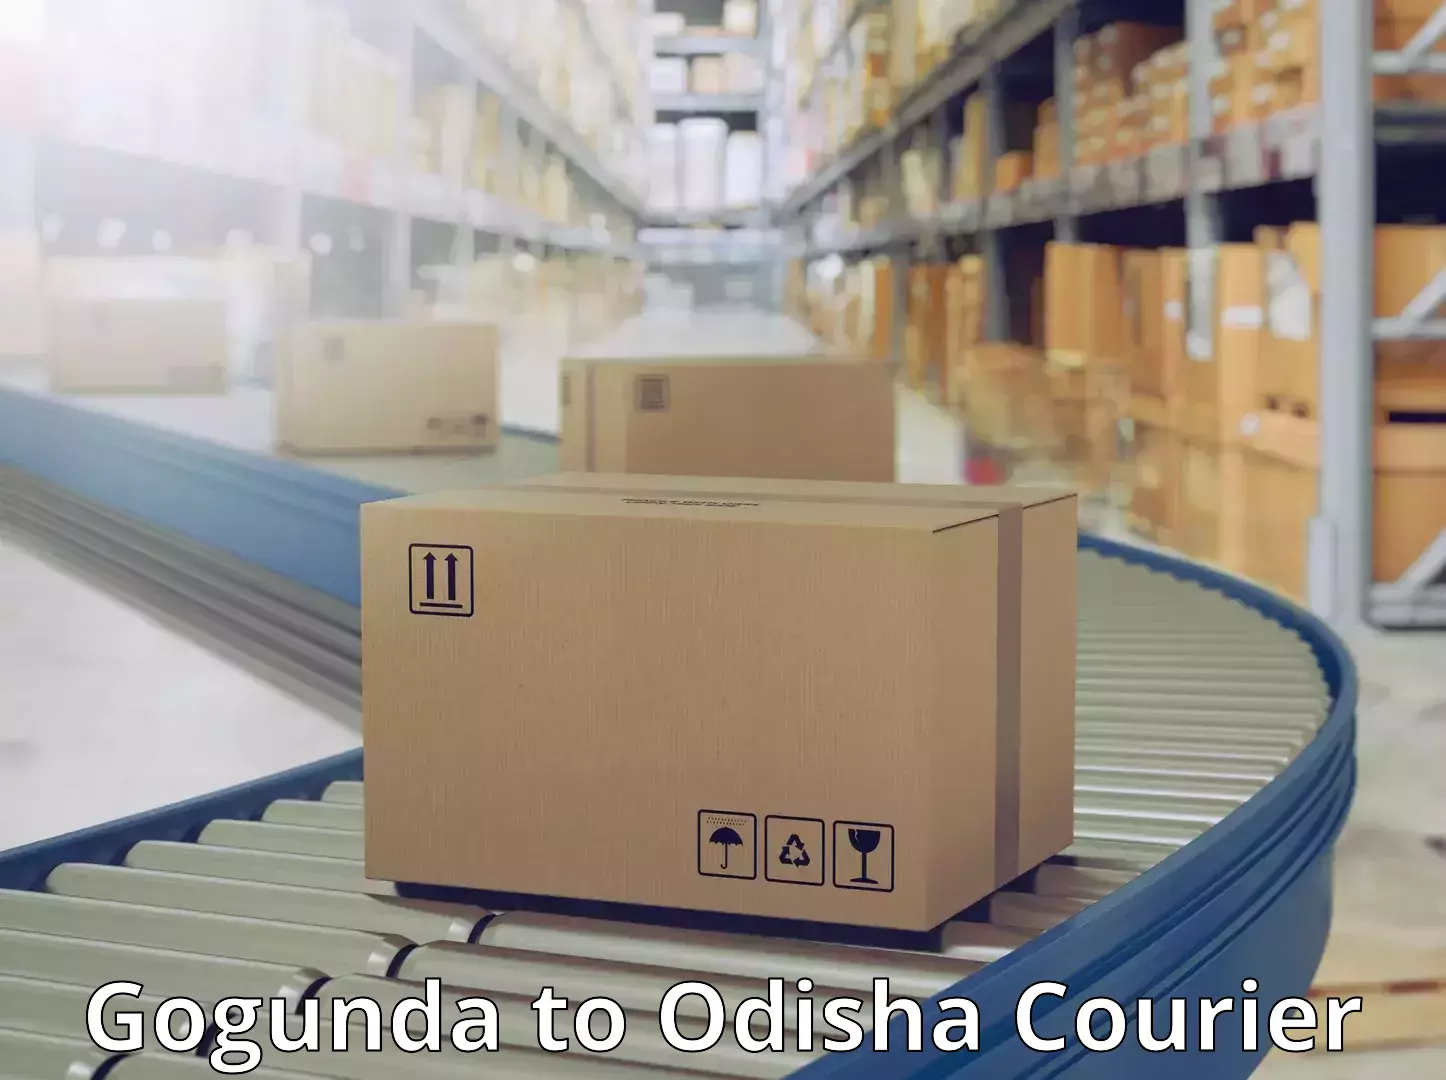 Modern delivery technologies Gogunda to Aul